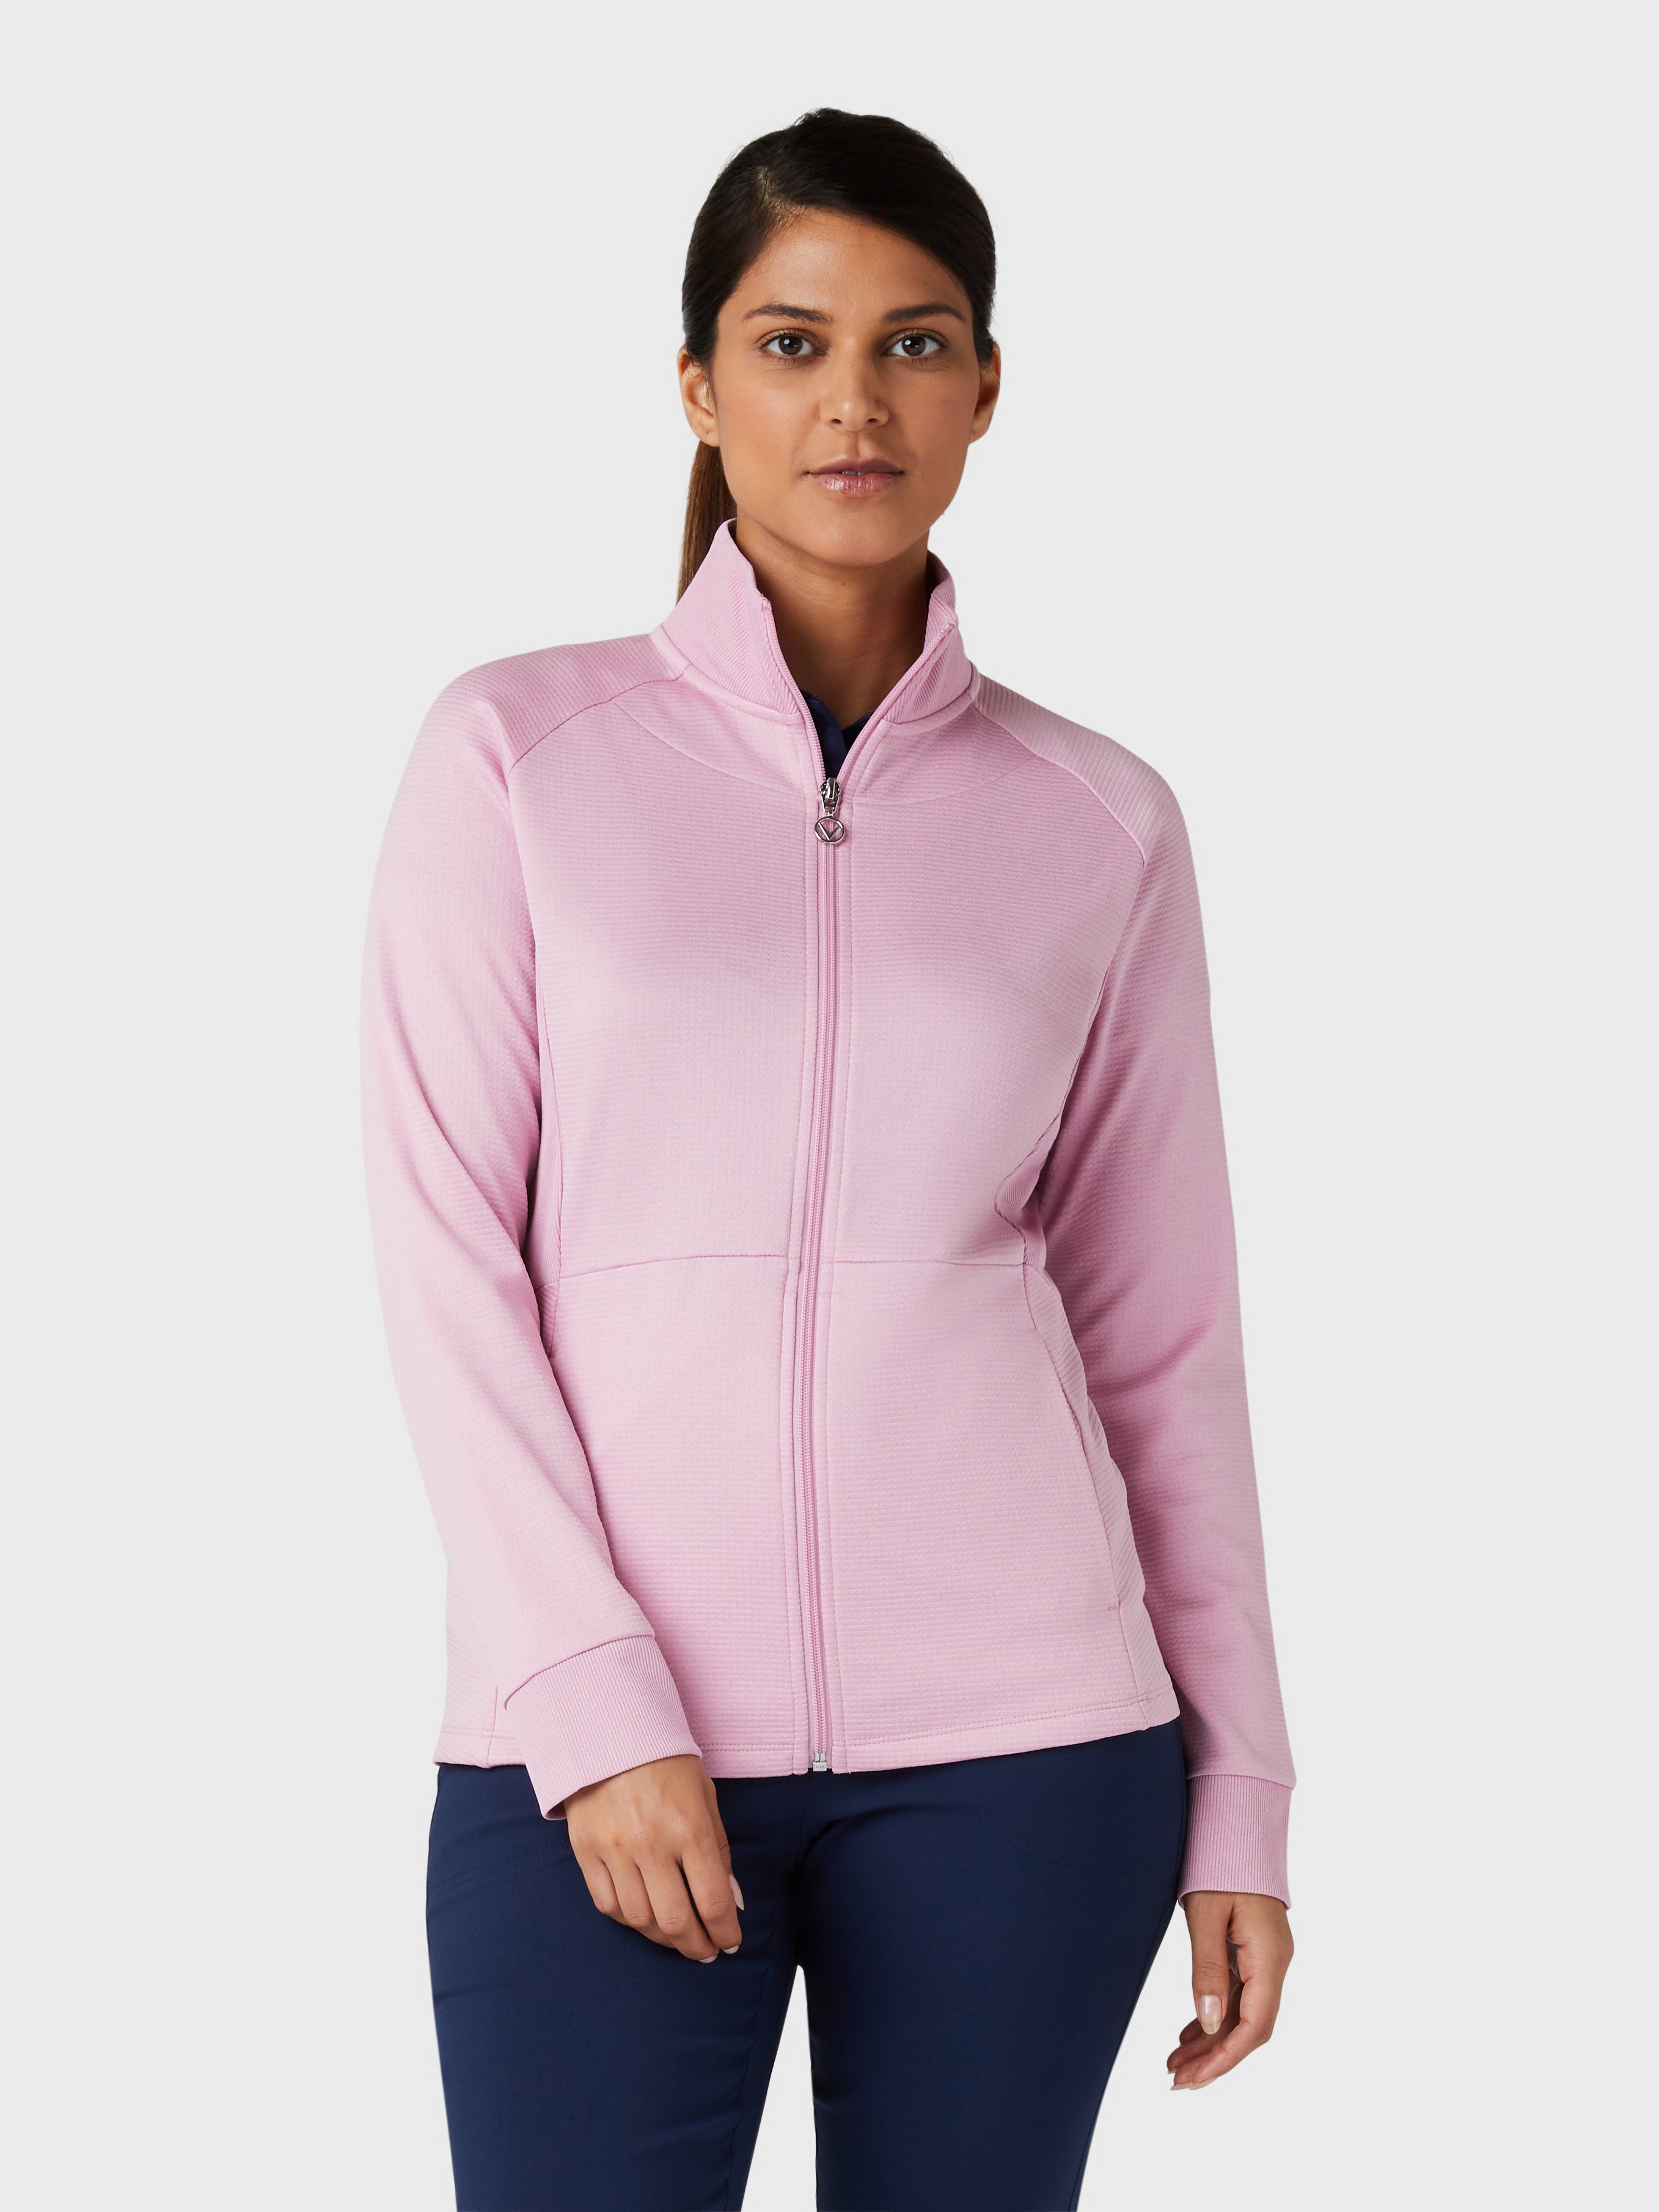 View Midweight Waffle Fleece Womens Jacket In Pink Nectar Heather Pink Nectar Htr XS information